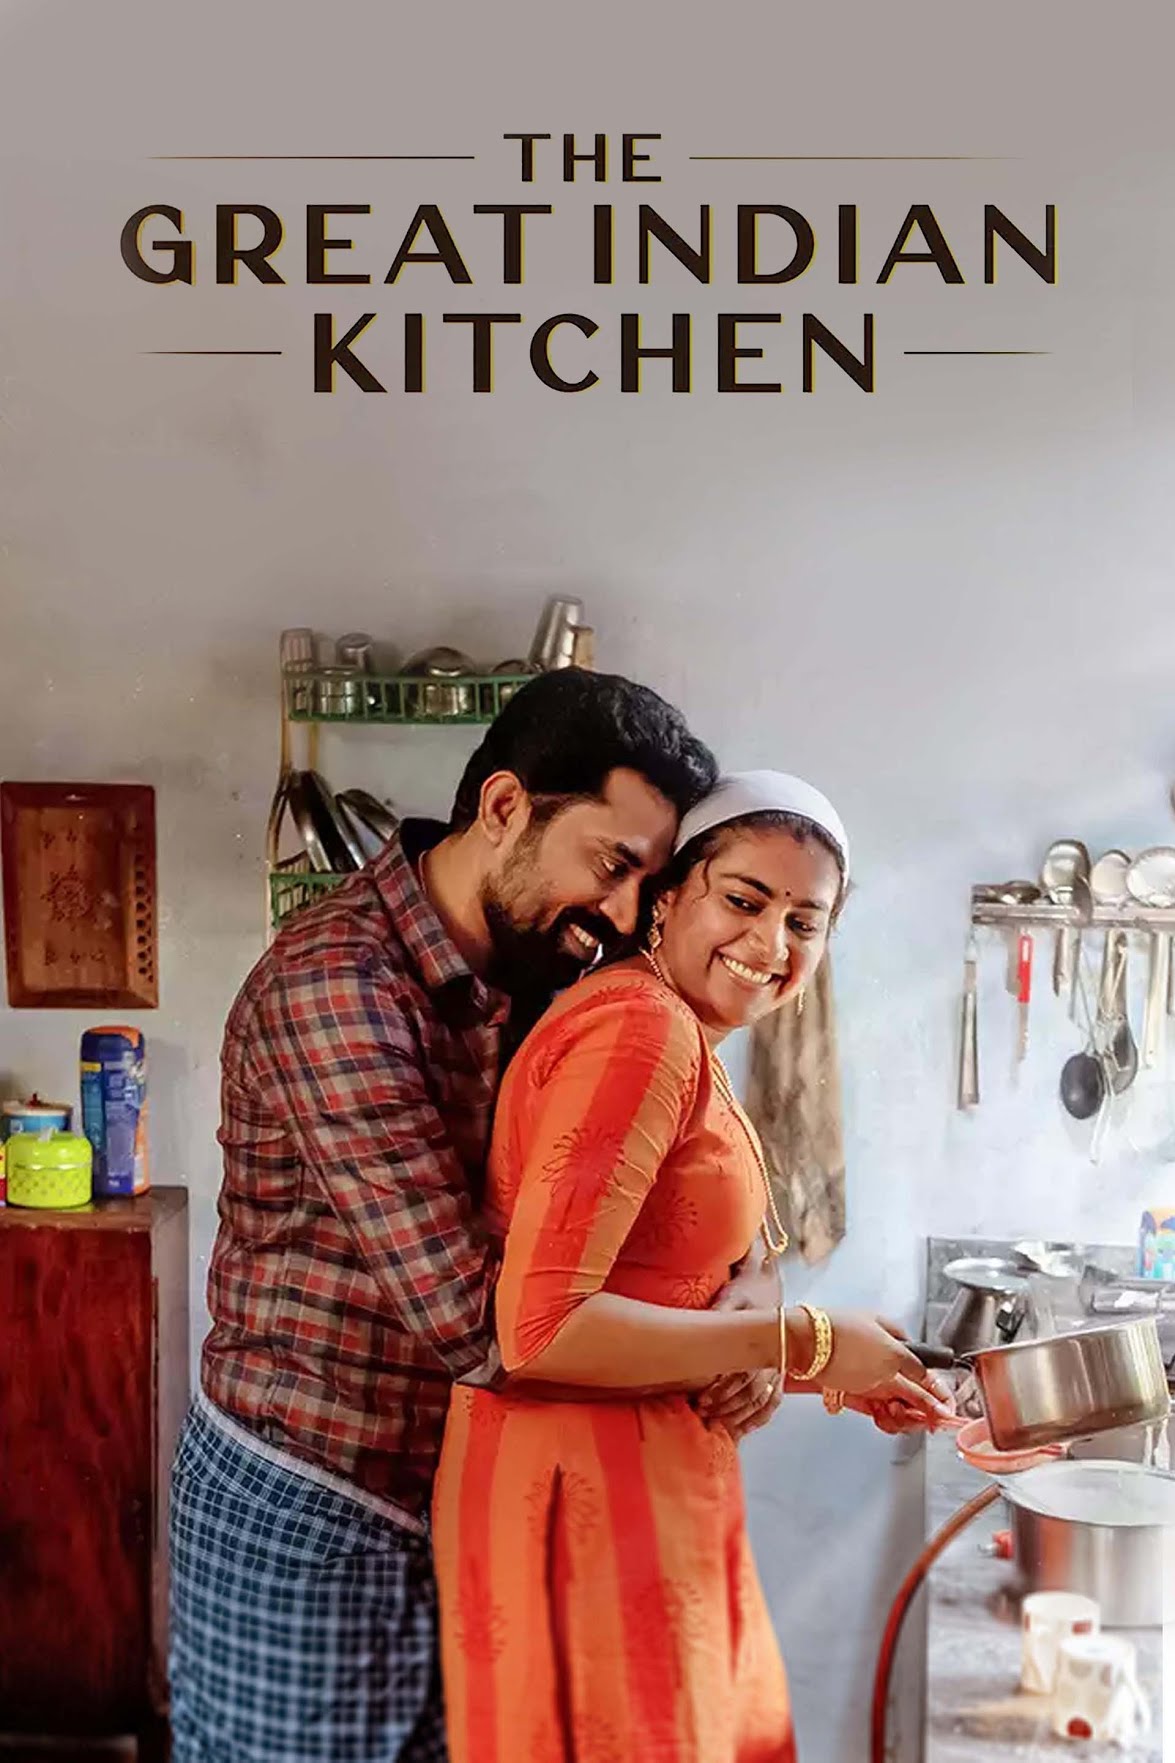 Download The Great Indian Kitchen 2021 HQ Hindi Dubbed 720p HDRip 700MB